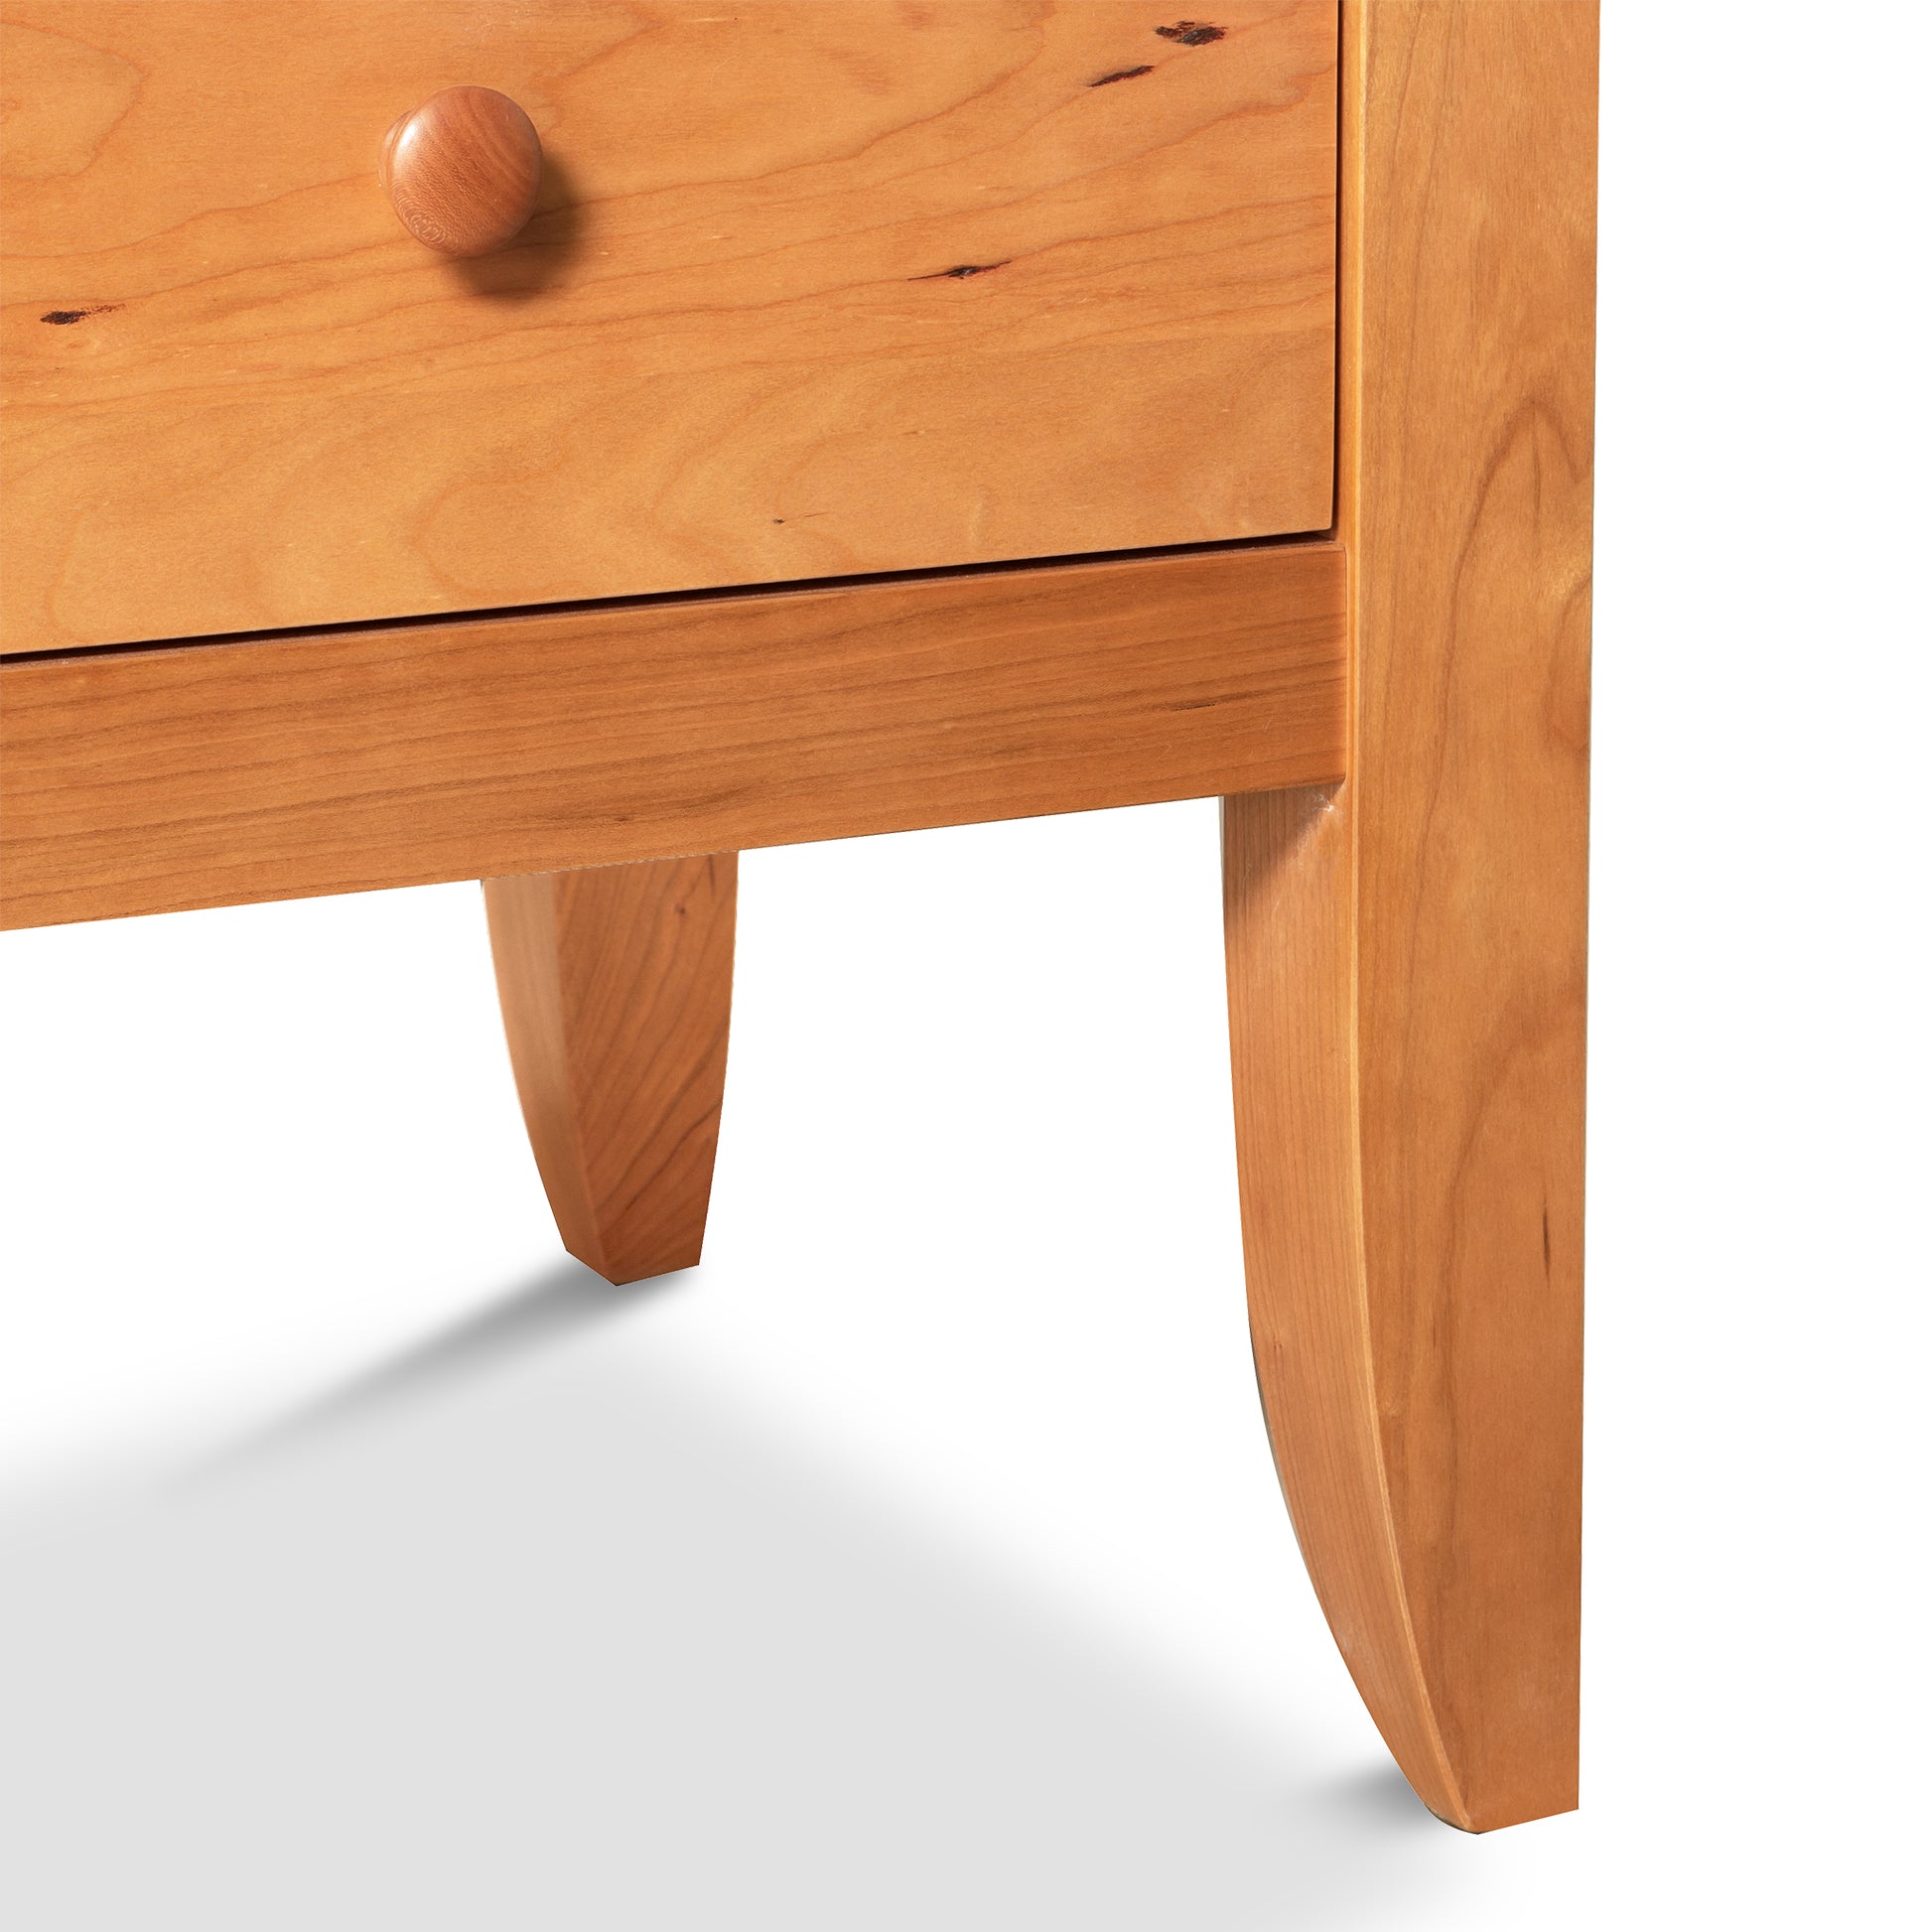 A Lyndon Furniture Bow Front 8-Drawer Dresser nightstand with a drawer.